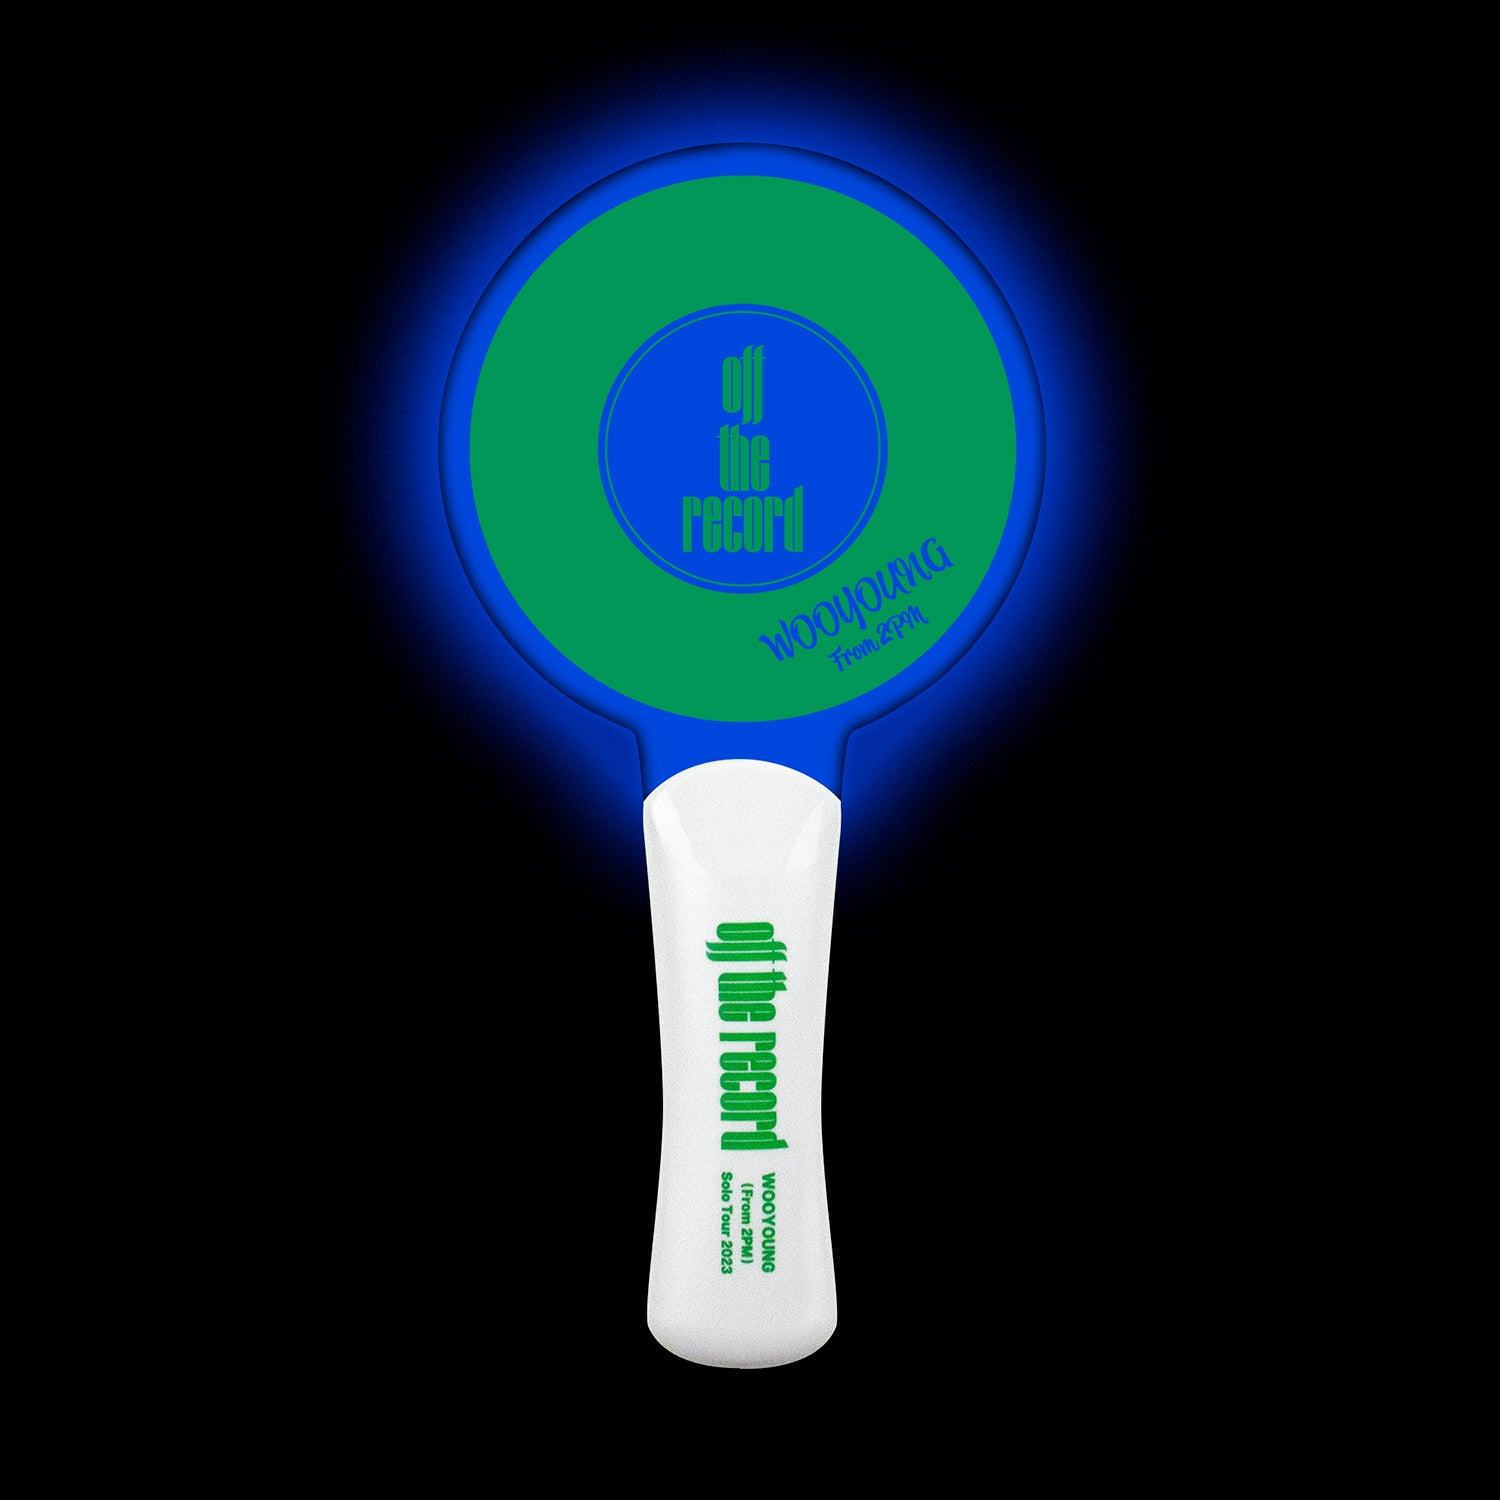 LIGHT STICK / WOOYOUNG (From 2PM)『Off the record』